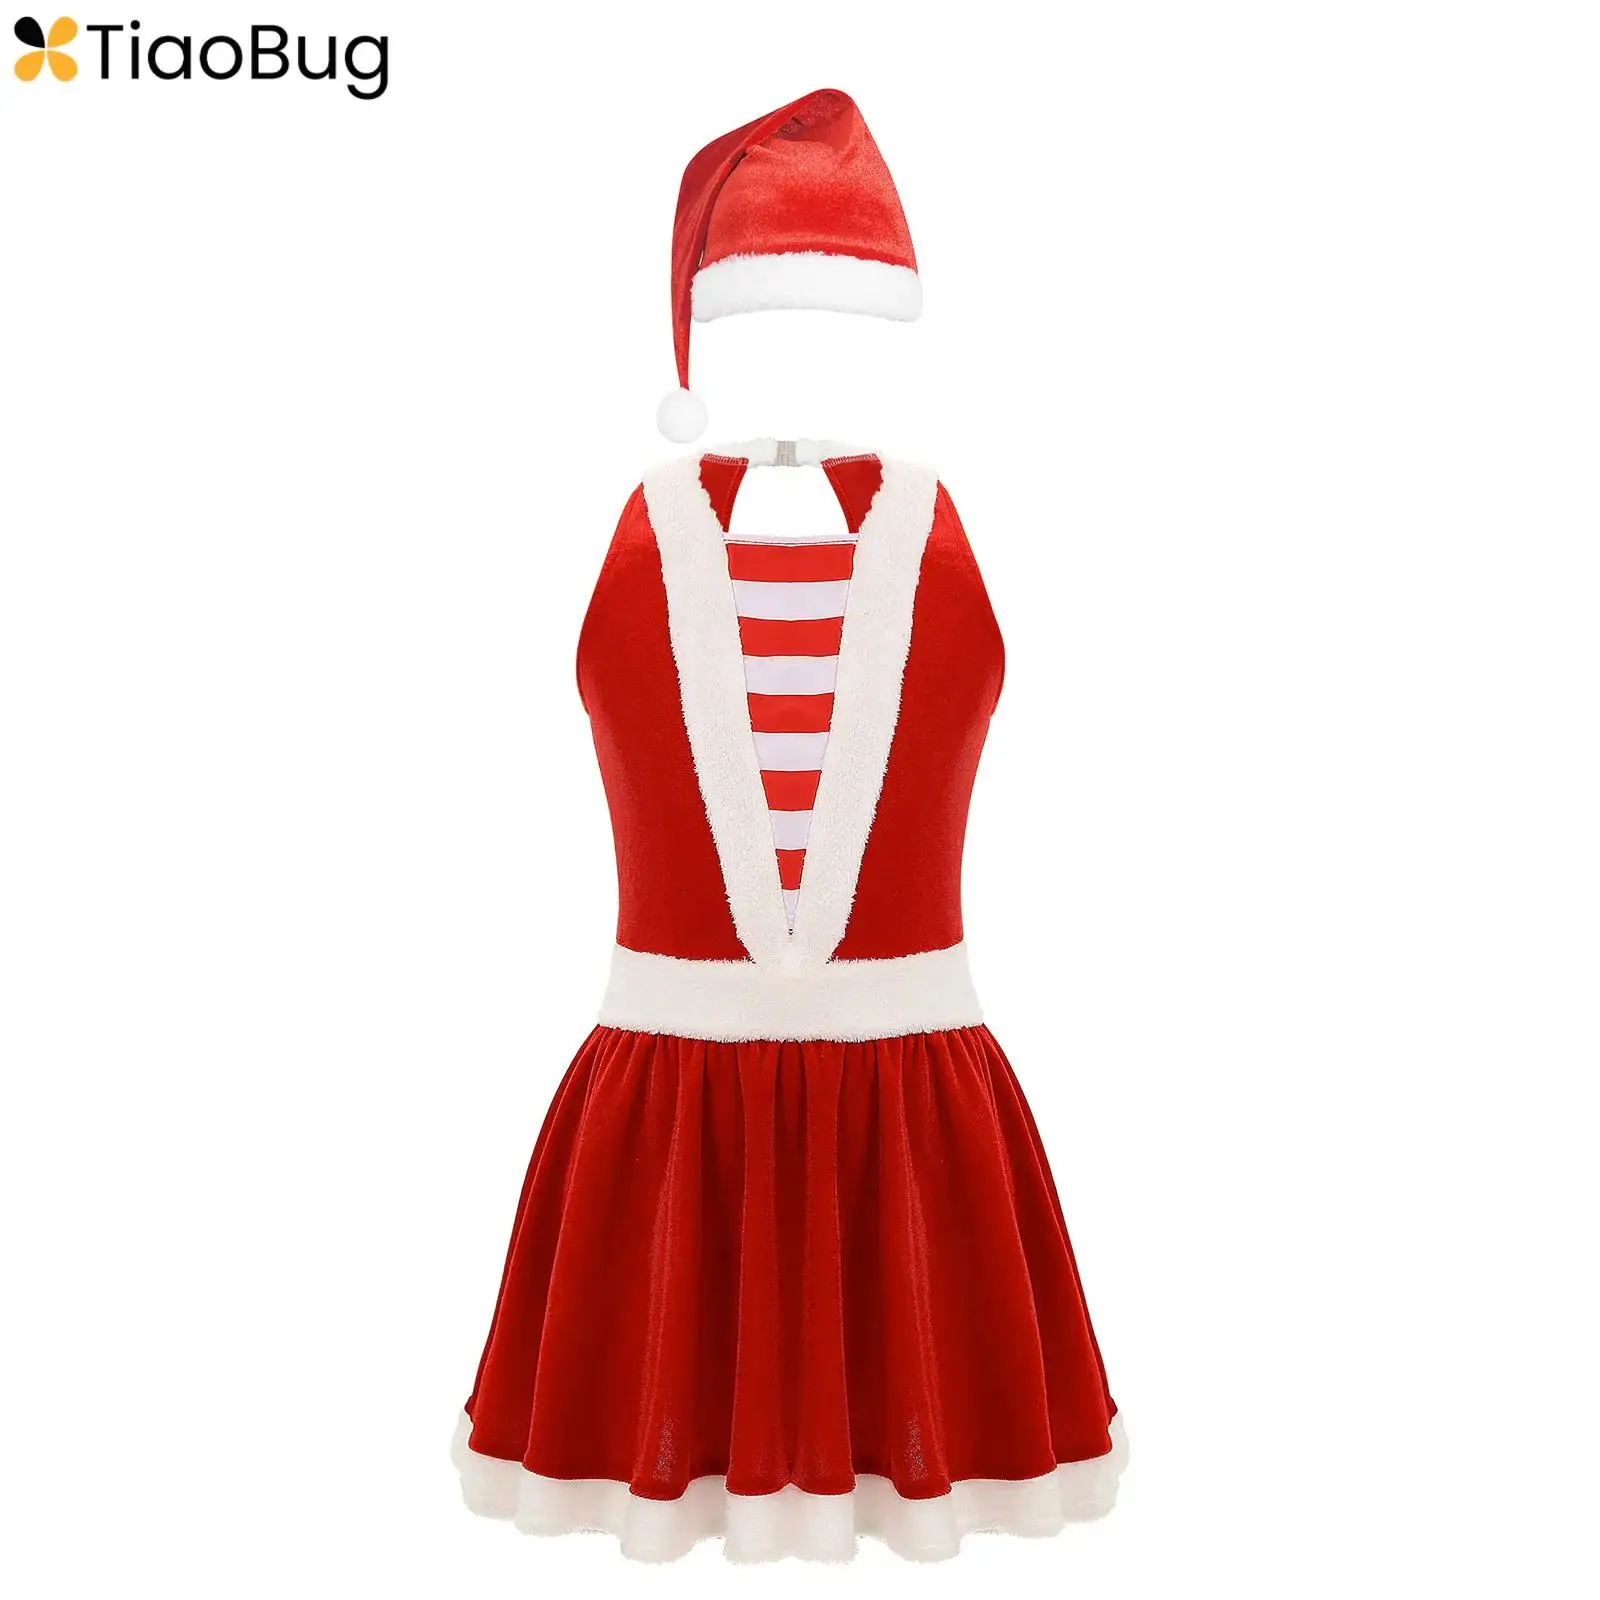 

Kids Girls Christmas Mrs Santa Claus Costume Sleeveless Ballet Dance Skating Tutu Dress with Hat Xmas Party Candy Cane Cosplay